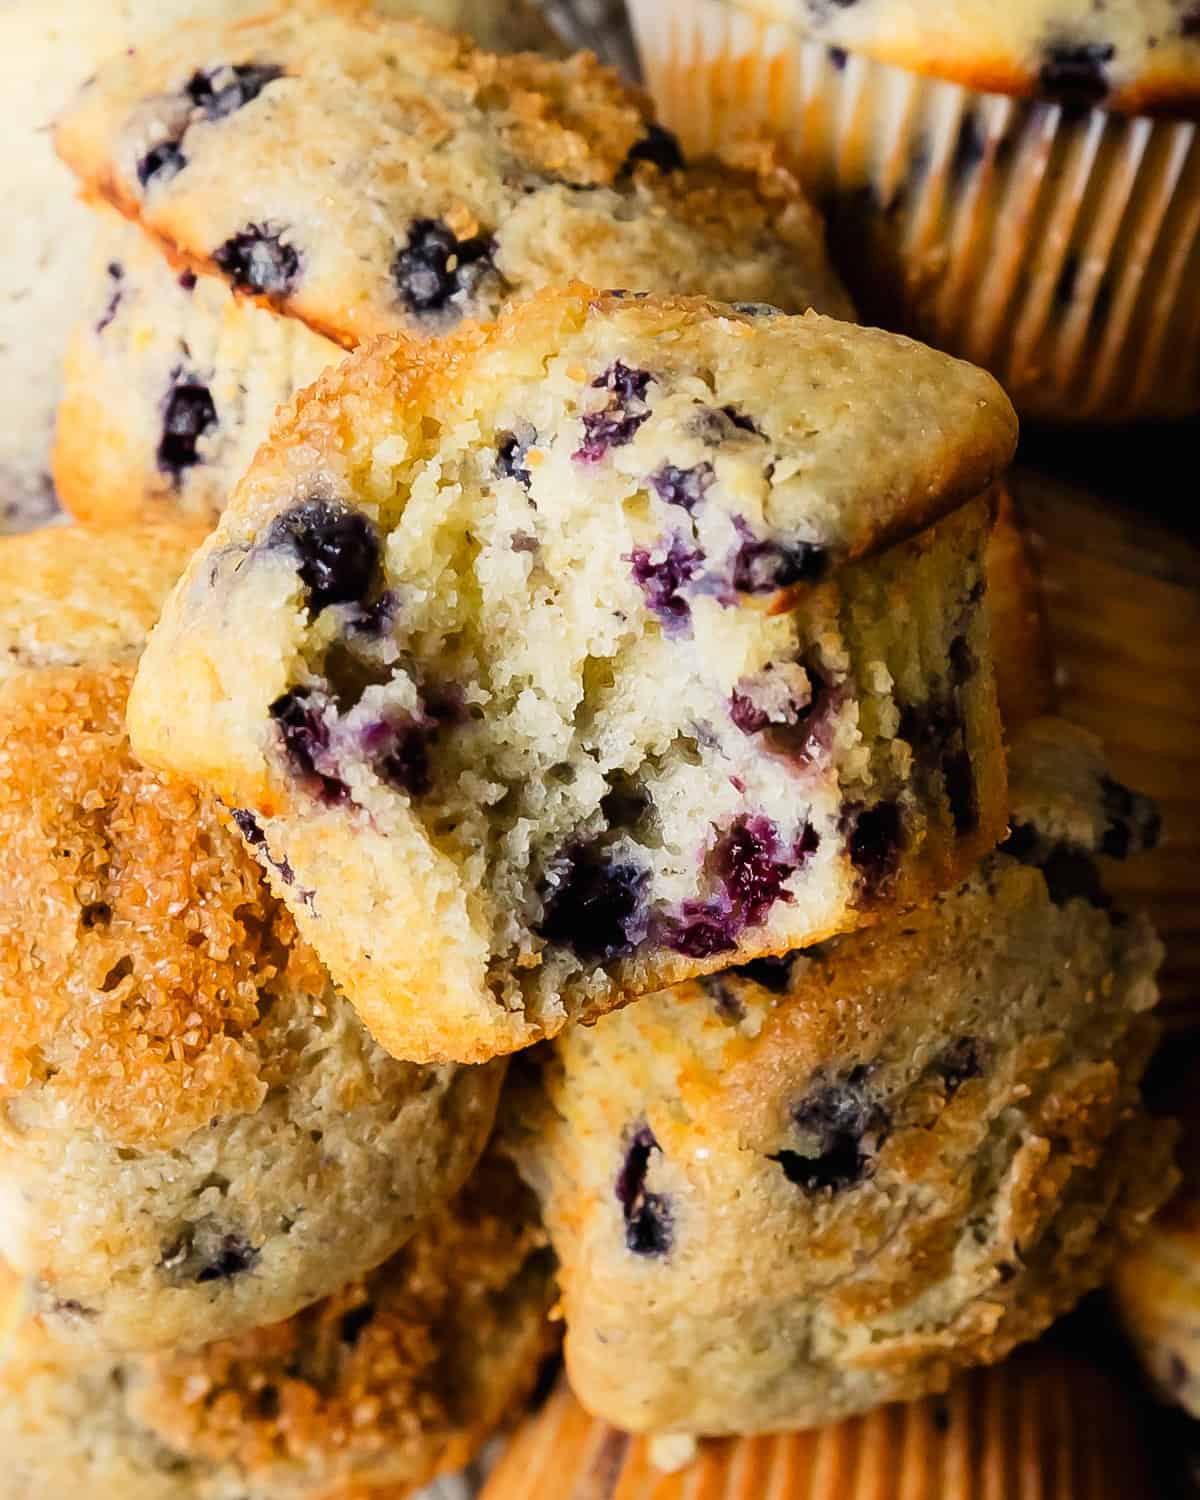 These buttermilk blueberry muffins are light, fluffy and incredibly moist buttermilk muffins filled with fresh blueberries. They’re bakery style muffins with beautiful tall, domed tops covered in crunchy bits of sparkling sugar.